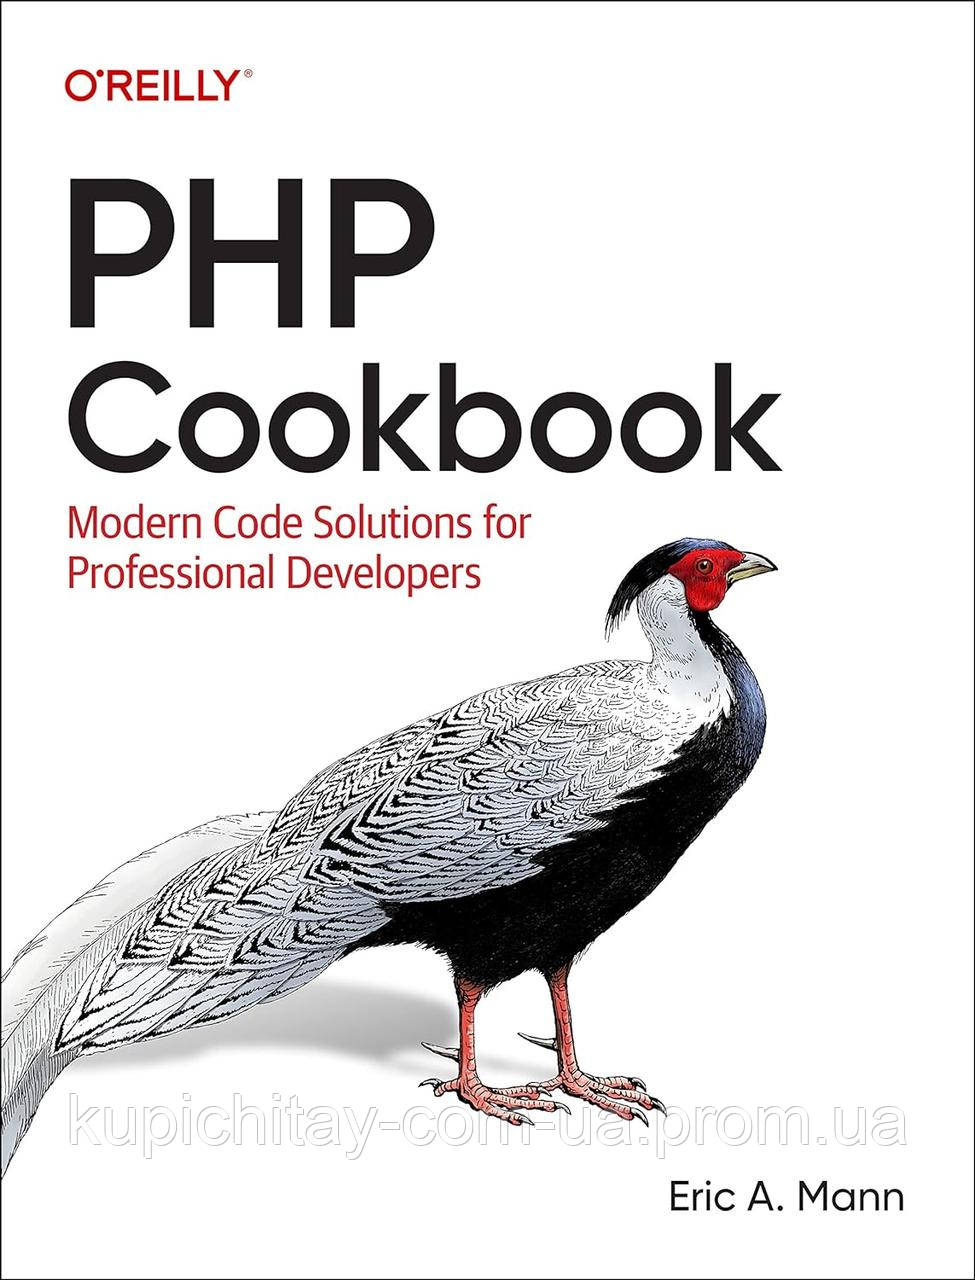 PHP Cookbook: Modern Code Solutions for Professional Developers, Eric Mann